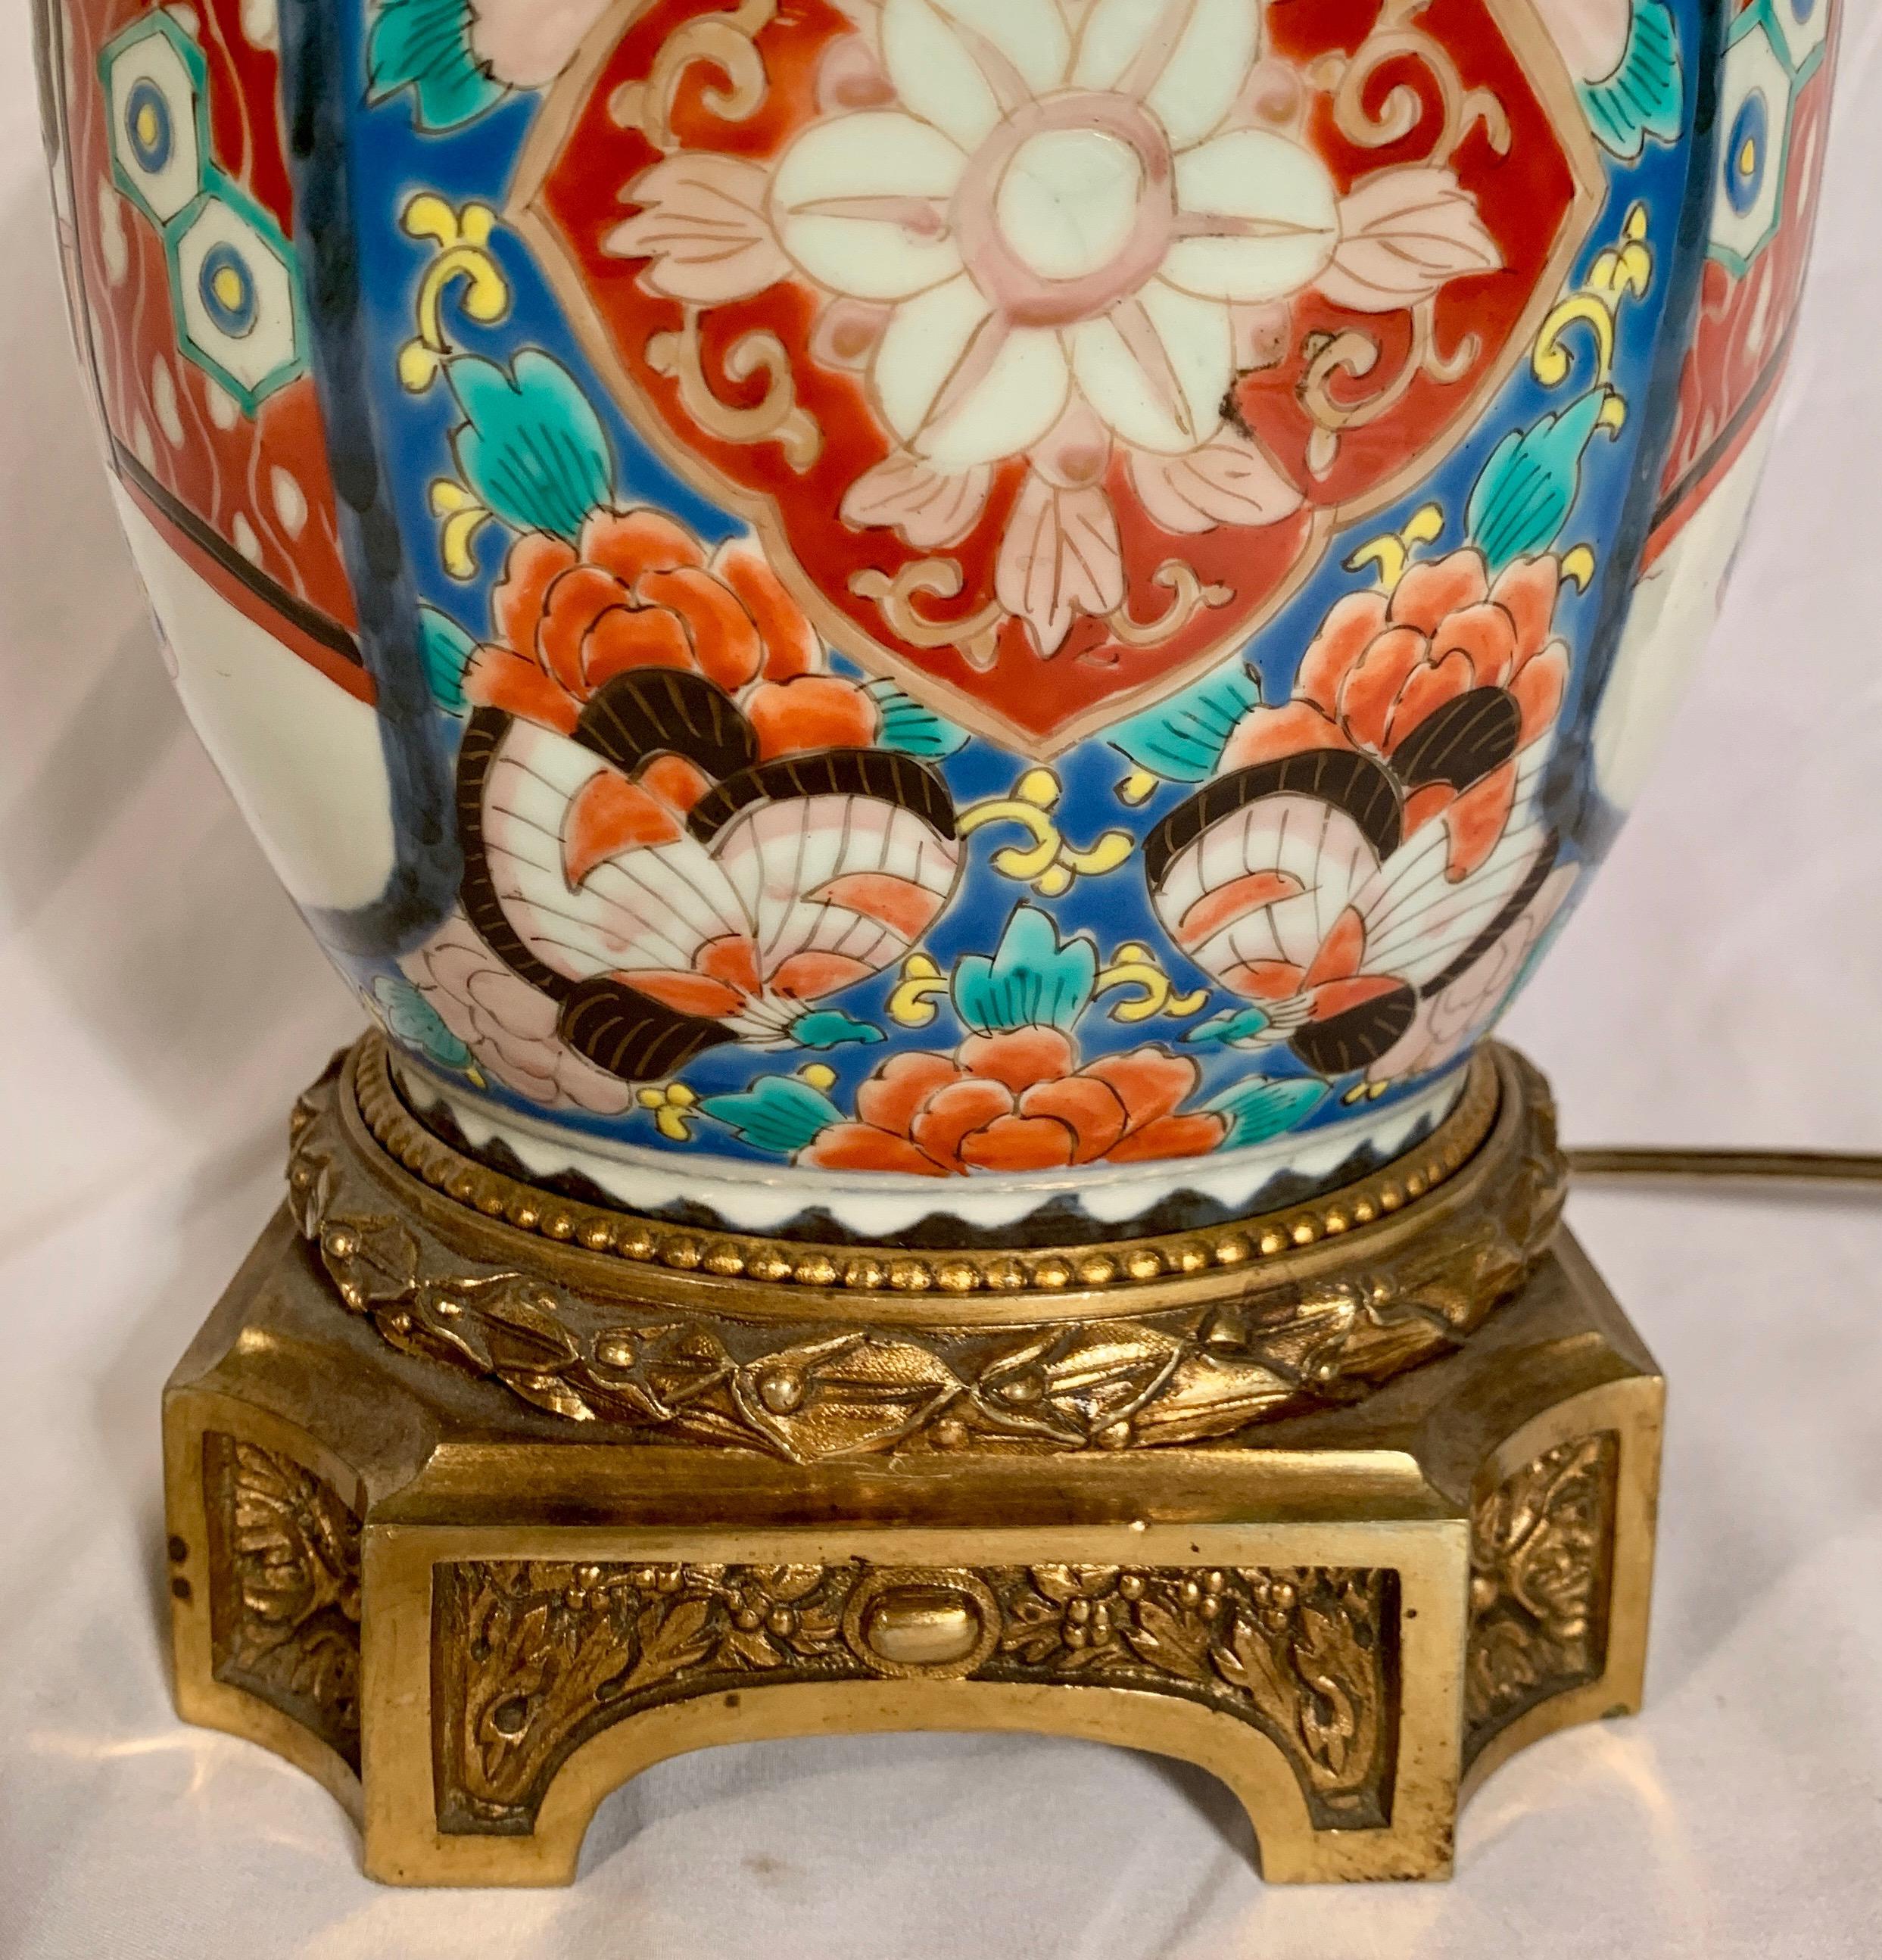 This lovely Japanese urn was converted to a lamp. The colors on the porcelain urn remain strong and the design sharp. 
